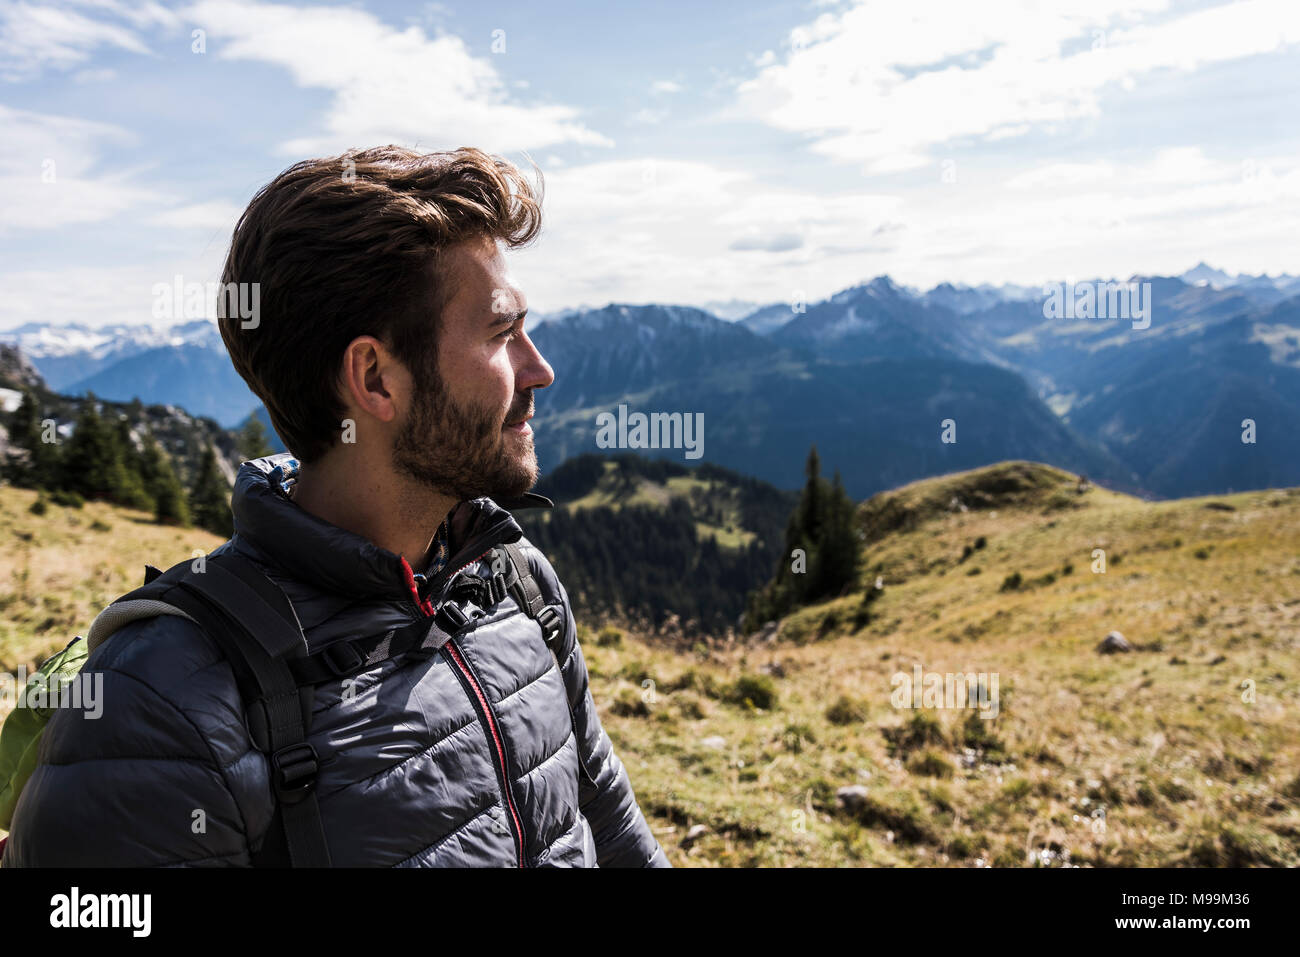 Austria, Tyrol, portrait of young man in mountainscape looking at view Stock Photo